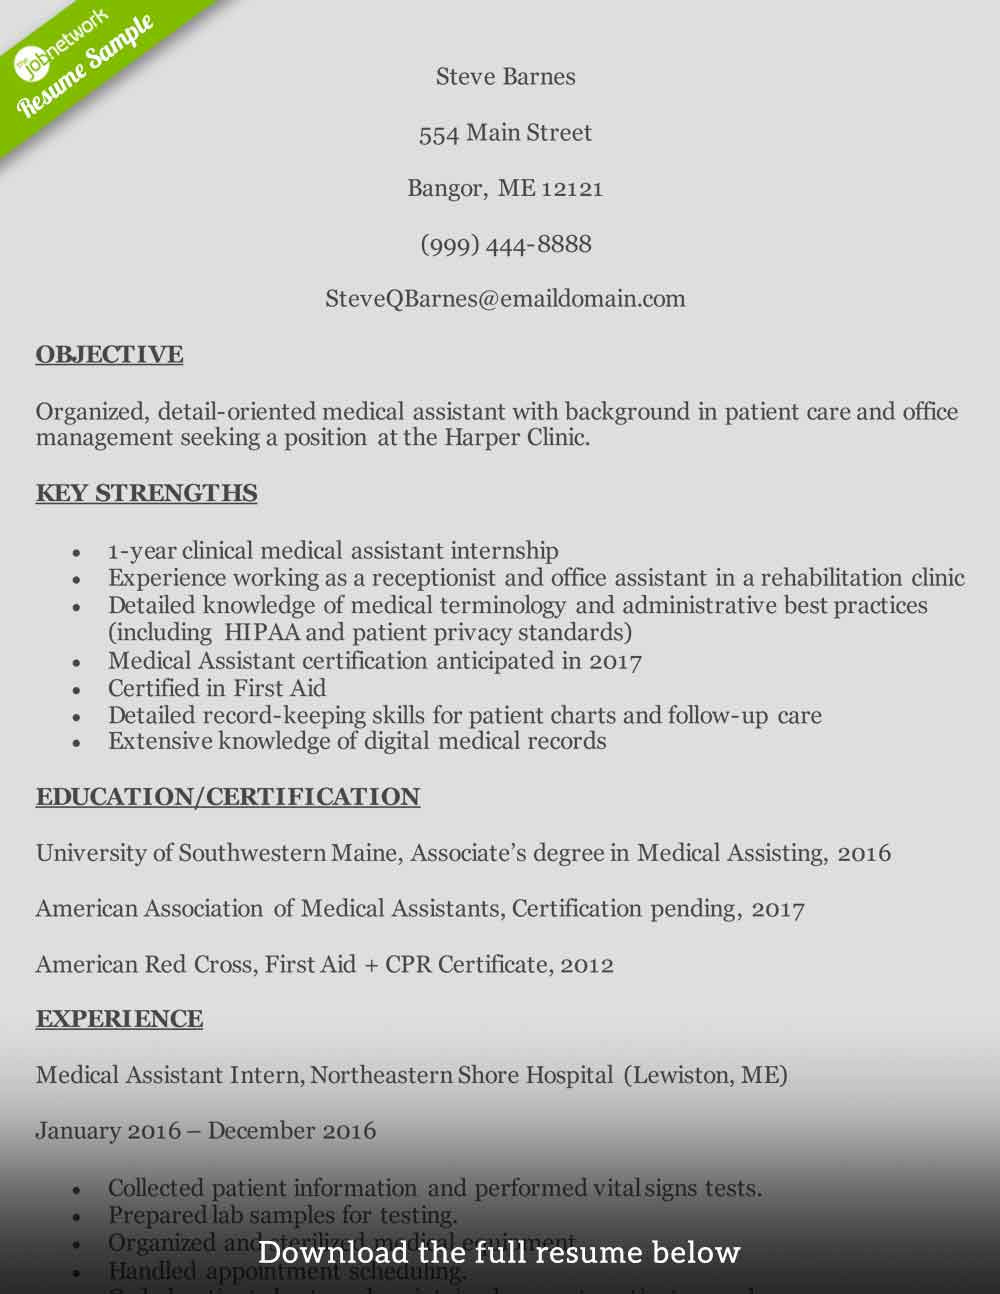 Beginner Entry Level Resume Samples for Medical Office How to Write A Medical assistant Resume (with Examples)